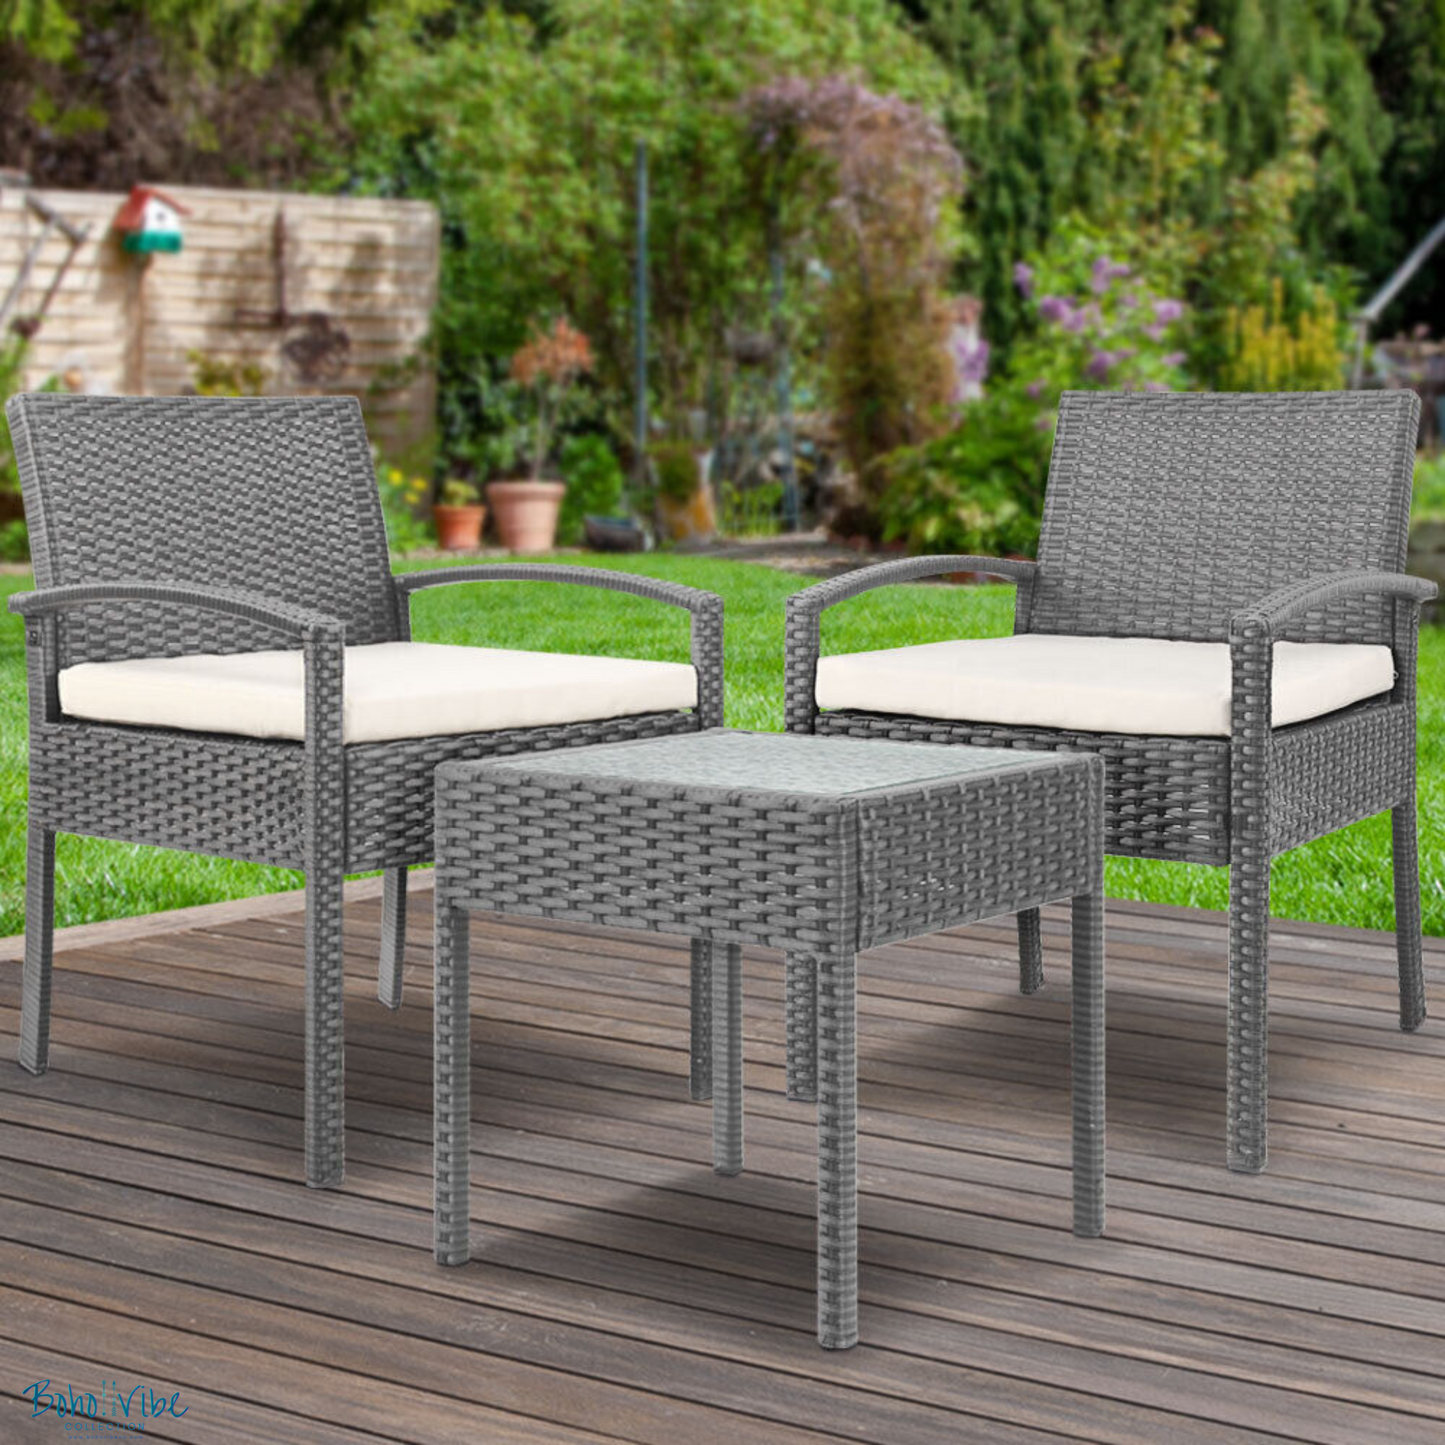 Boho ↡↟ Vibe Collection ↠ Grey Wicker Coastal 3 Piece Outdoor Setting Boho Chairs & Table Furniture Set